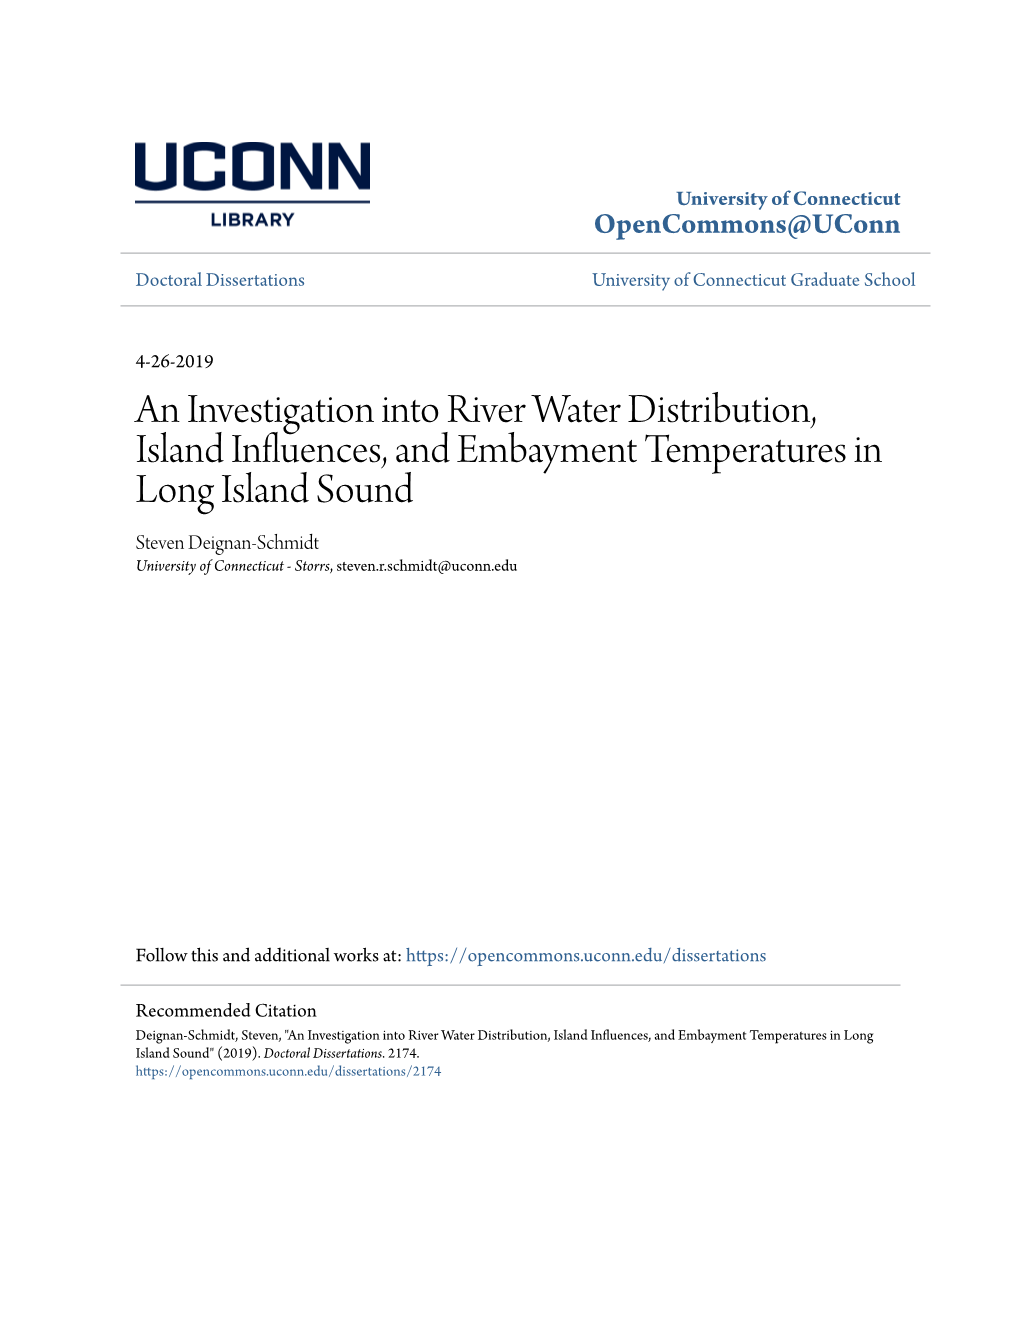 An Investigation Into River Water Distribution, Island Influences, And